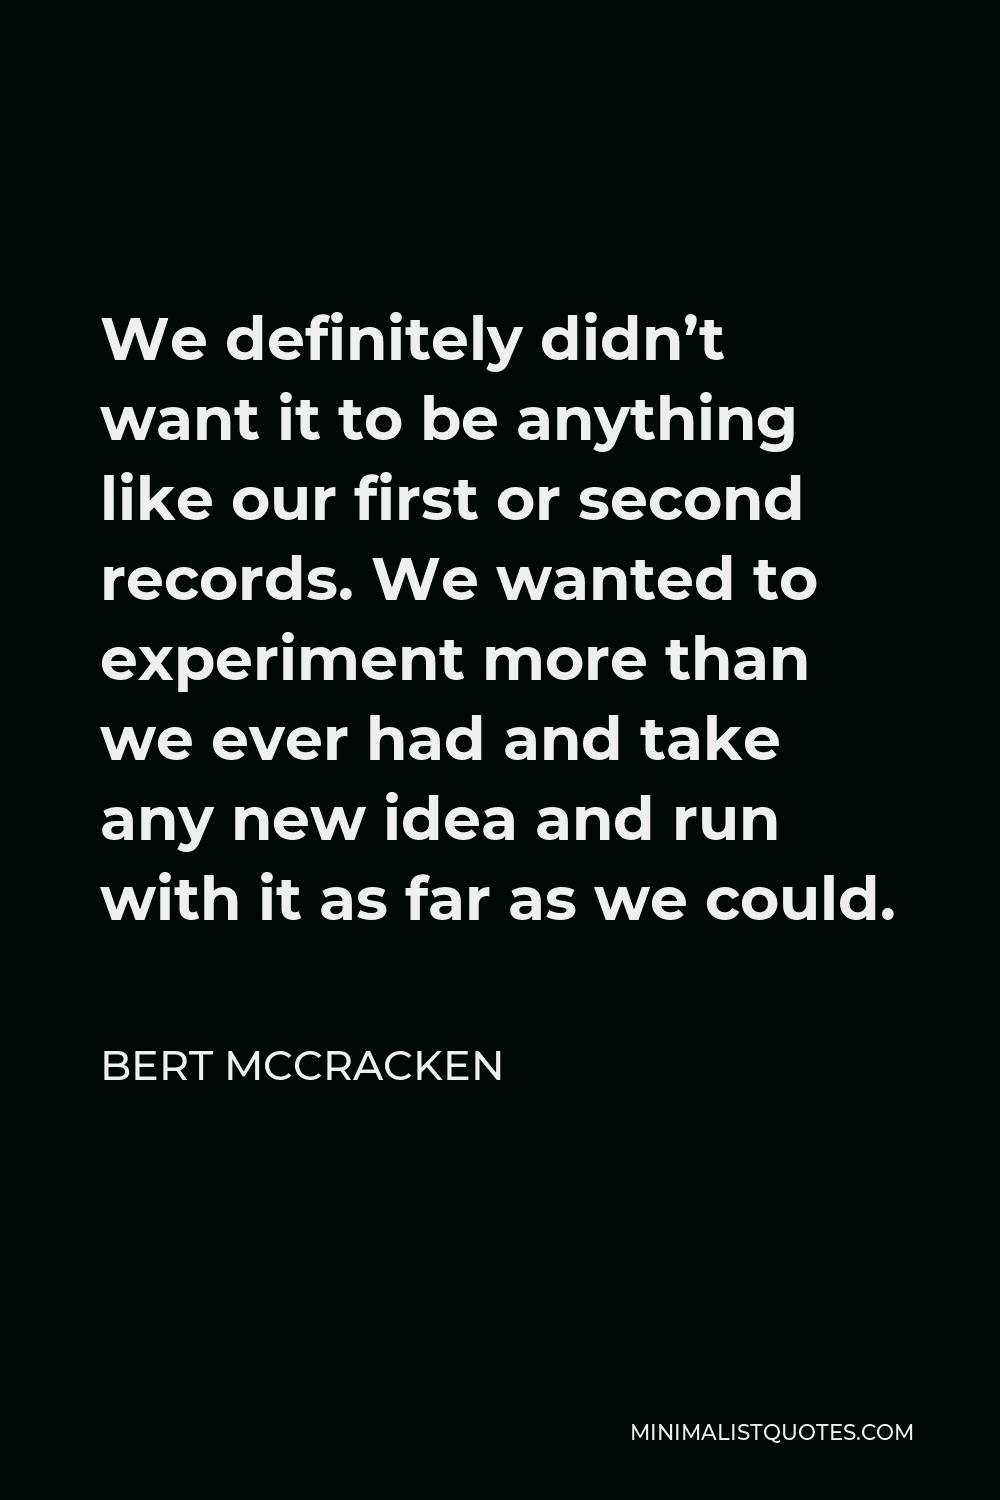 Bert McCracken Quote - We definitely didn’t want it to be anything like our first or second records. We wanted to experiment more than we ever had and take any new idea and run with it as far as we could.